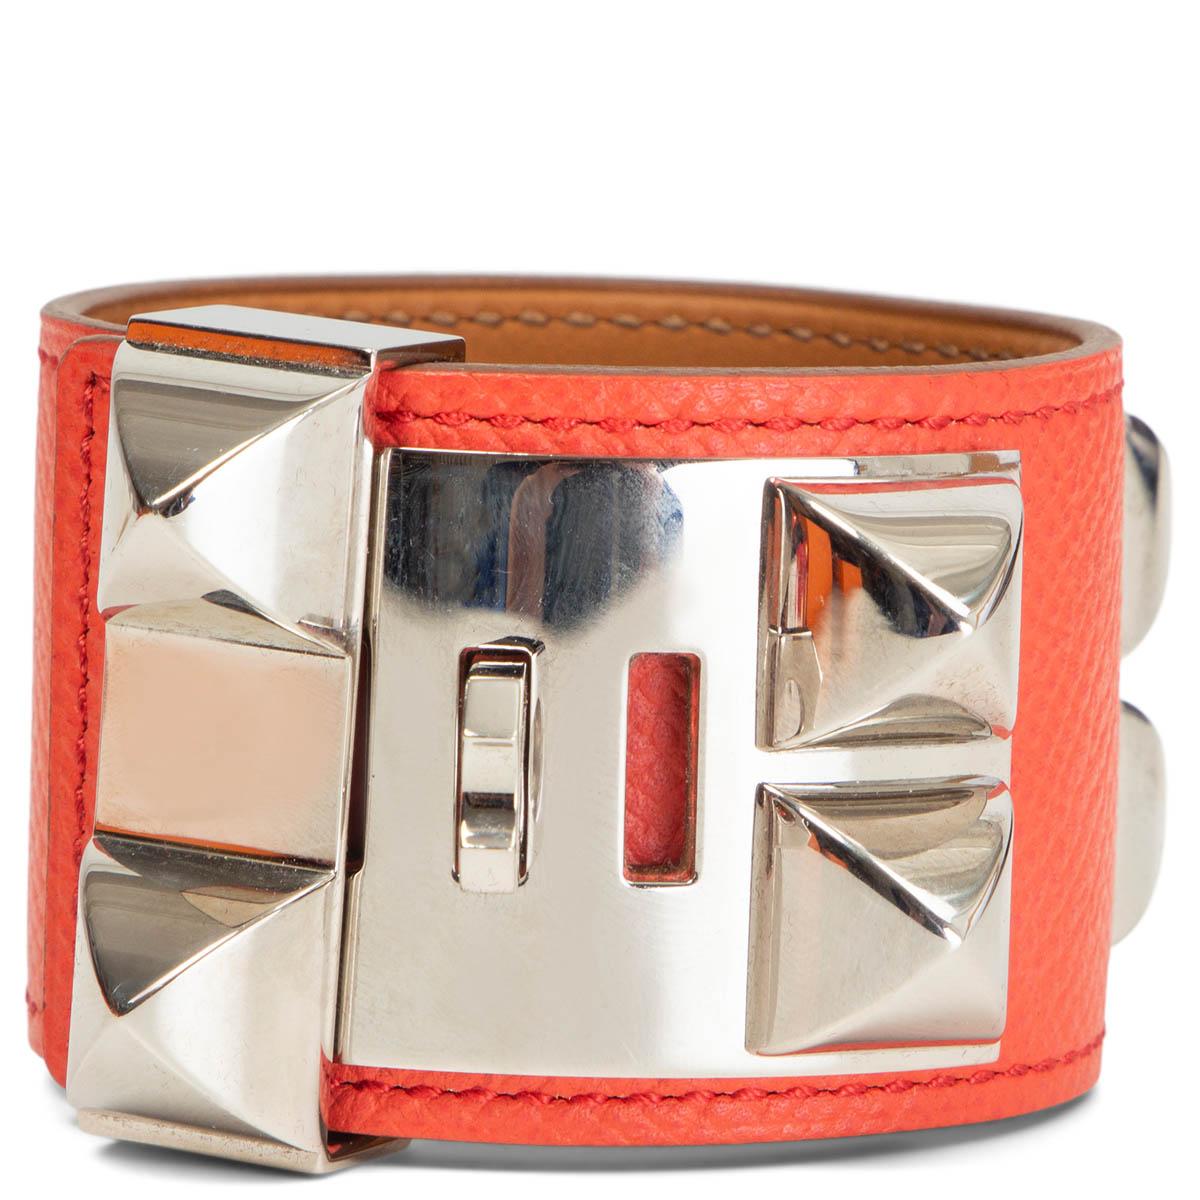 100% authentic Hermès Collier de Chien bracelet in Rose Jaipur Epsom leather with Palladium hardware. Has been worn with faint natural scratches to the hardware. Overall in excellent condition. Comes with dust bag and box. 

Measurements
Tag